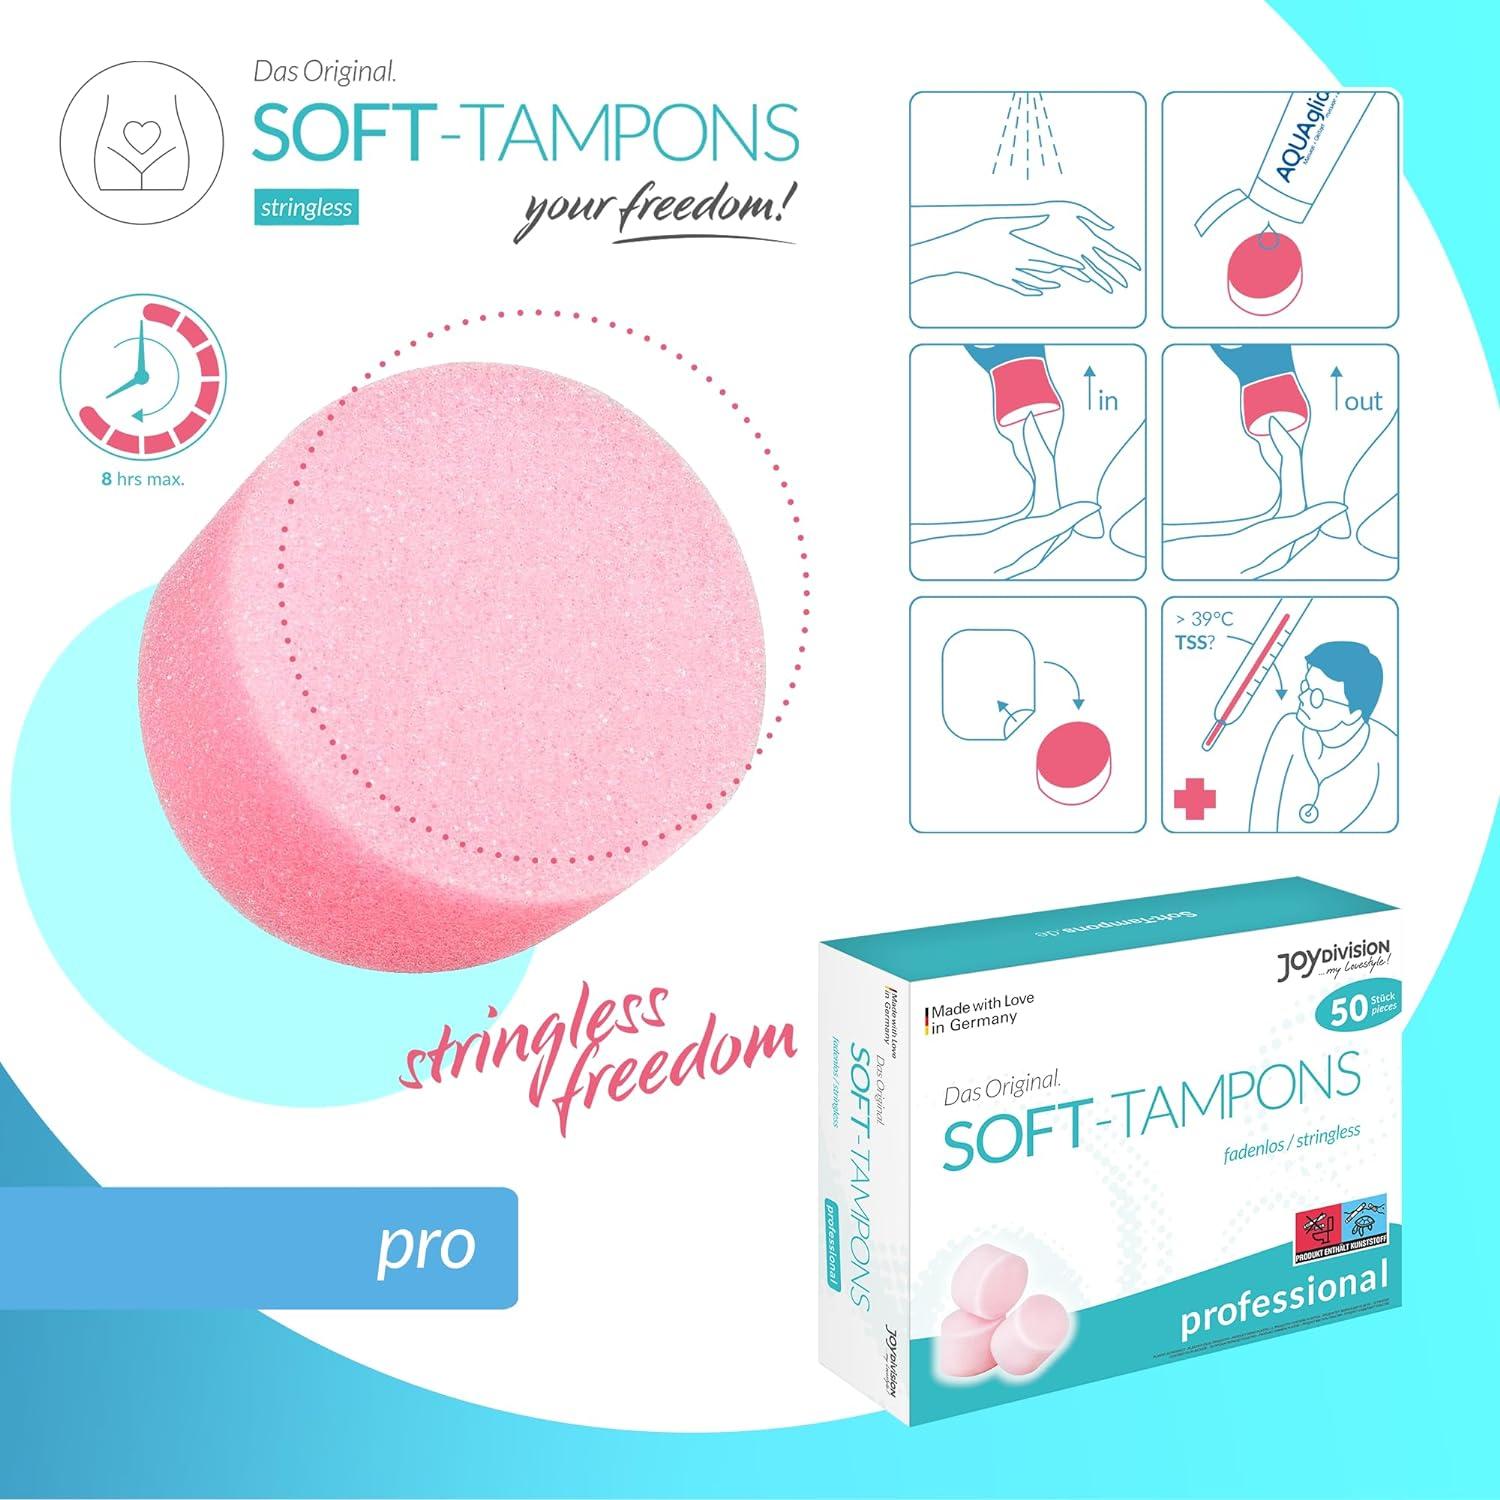 Discover stringless Soft-Tampons by JOYDIVISION